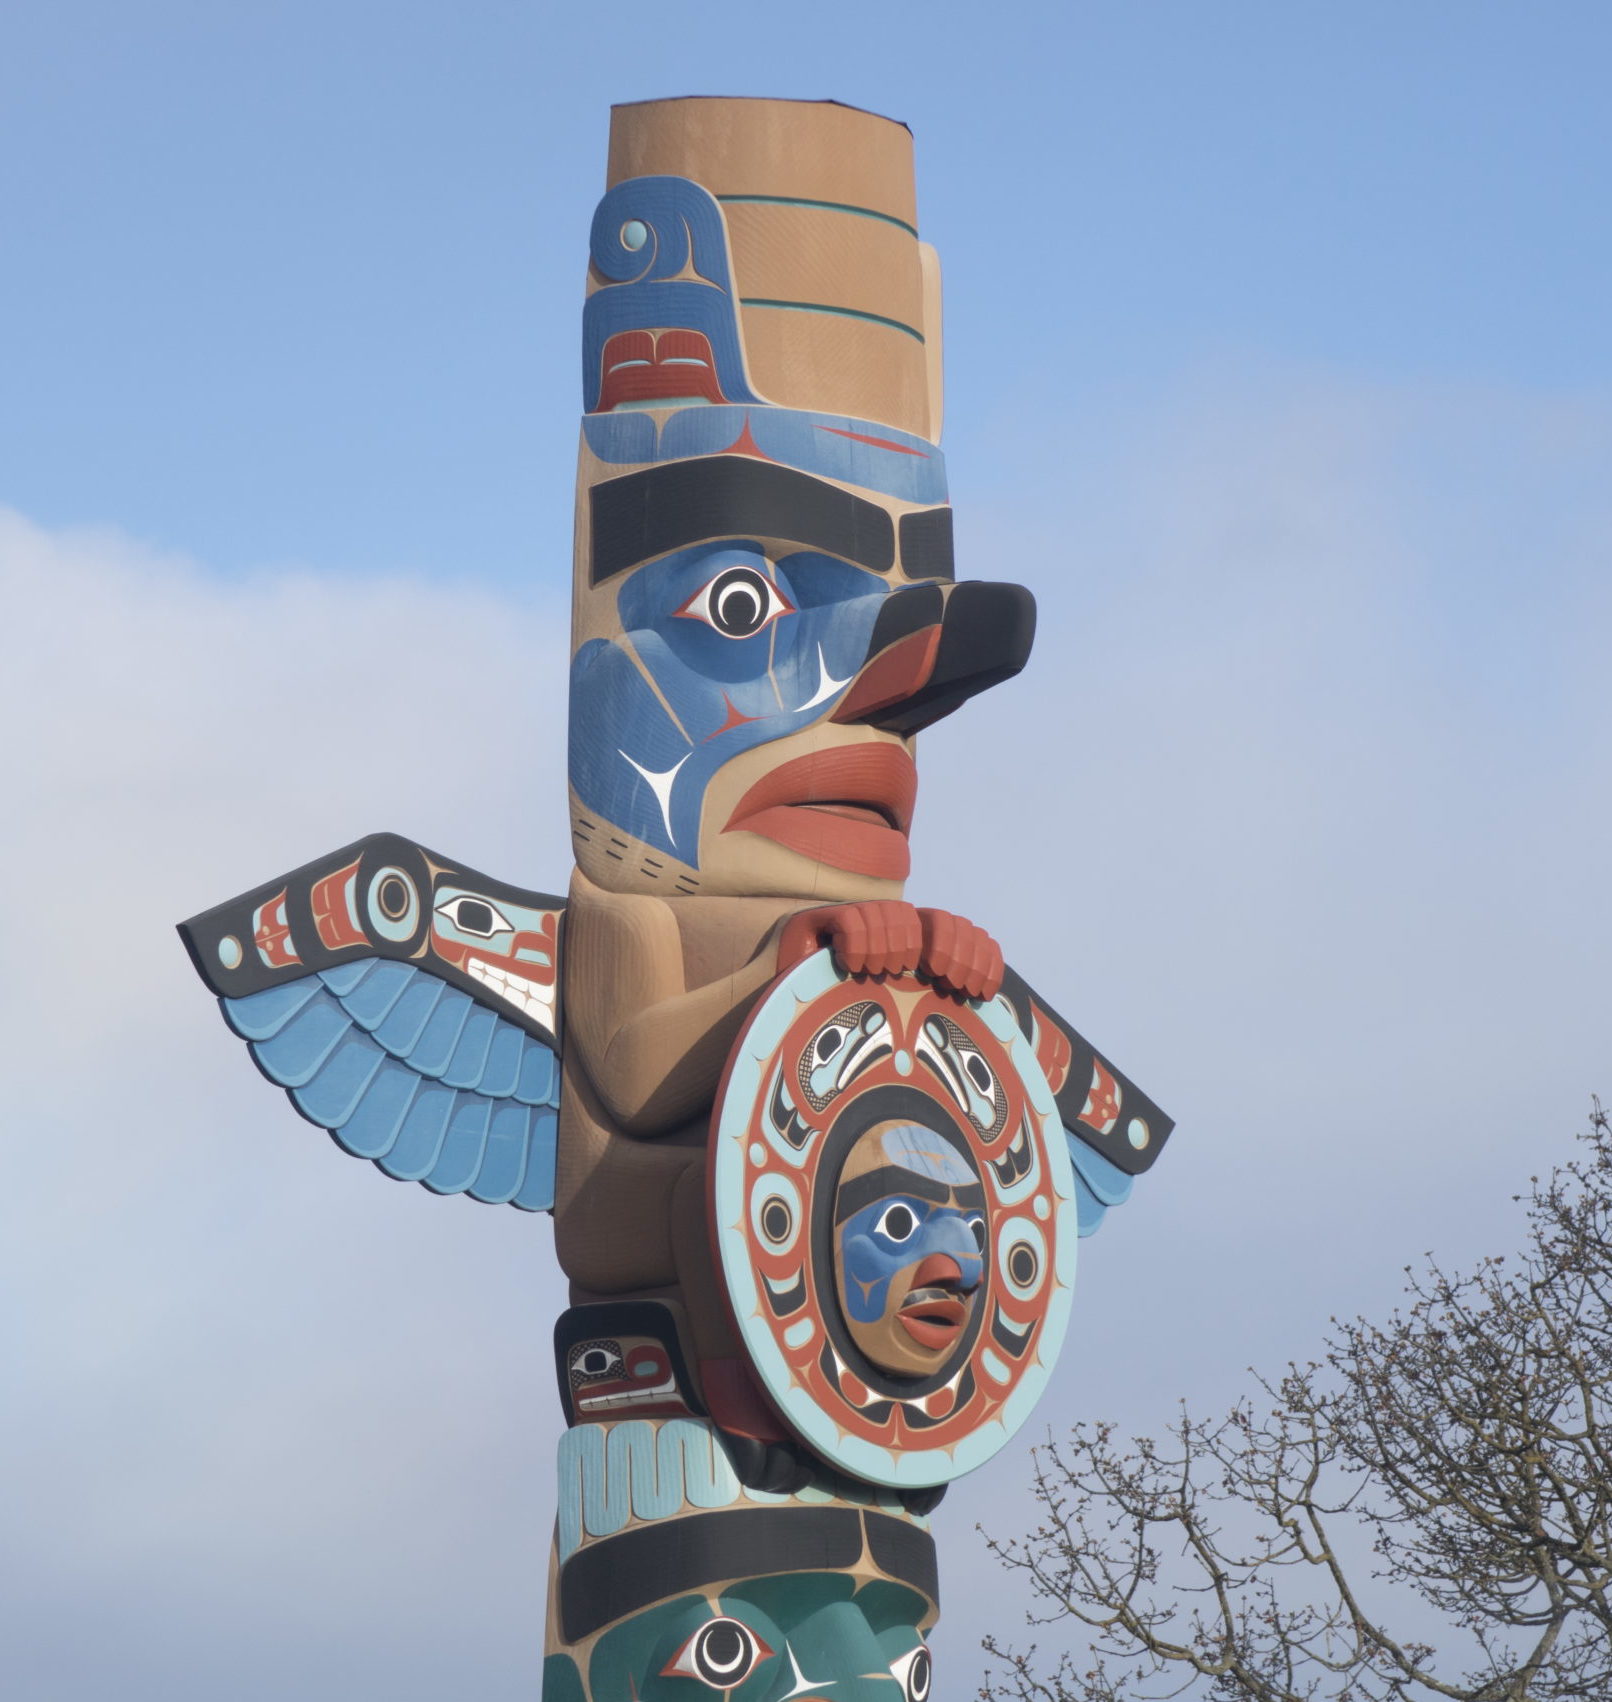 Totem Poles of the Jamestown S'Klallam Tribe - "Why the Sun Always Shines in Sequim"